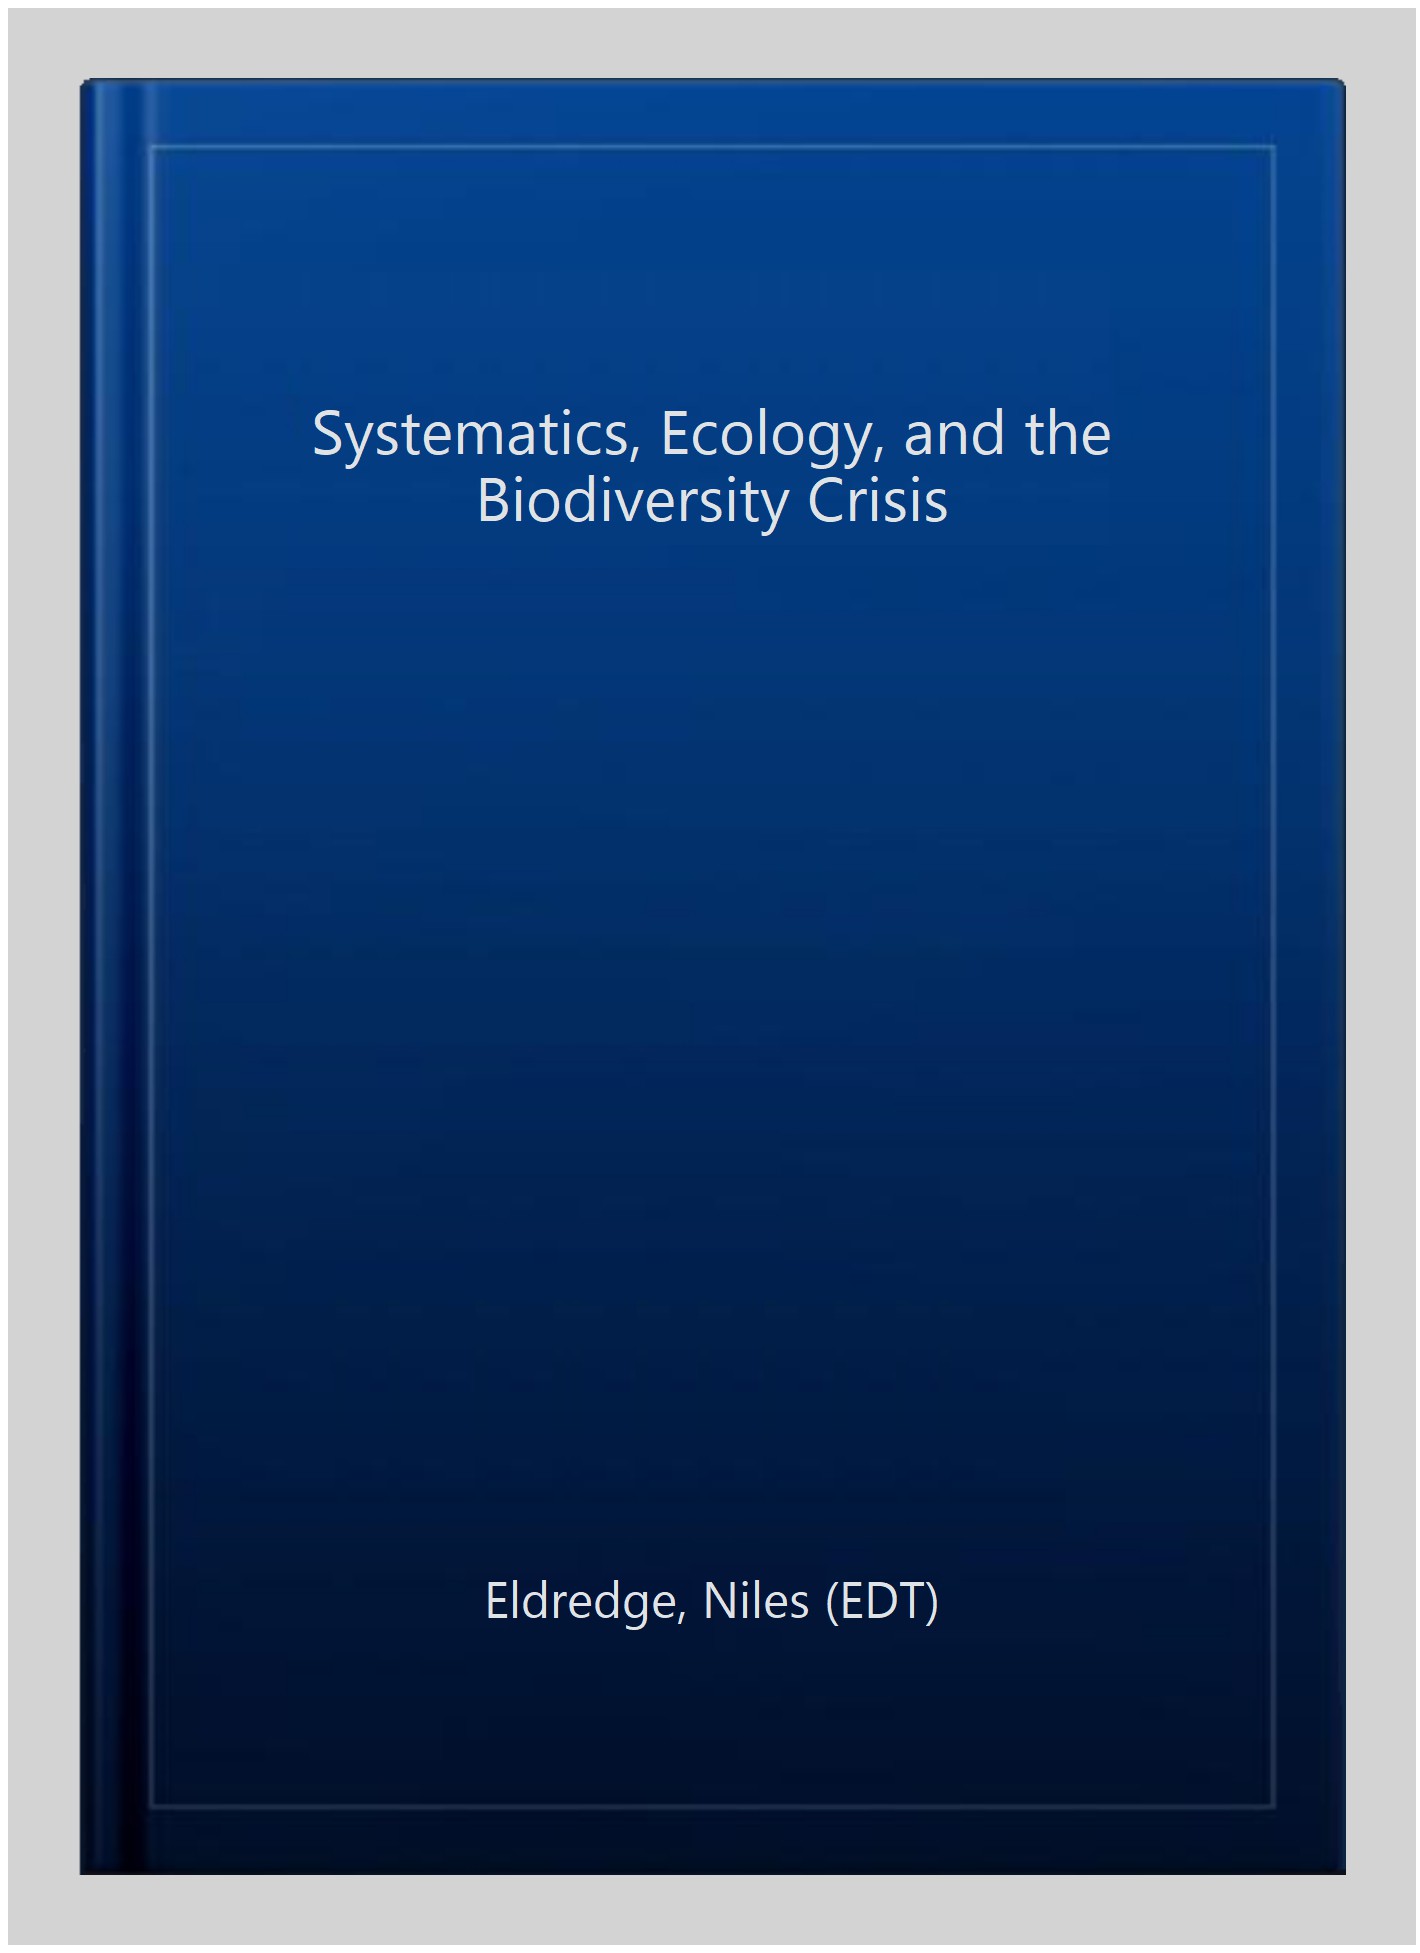 Systematics, Ecology, and the Biodiversity Crisis - Eldredge, Niles (EDT)